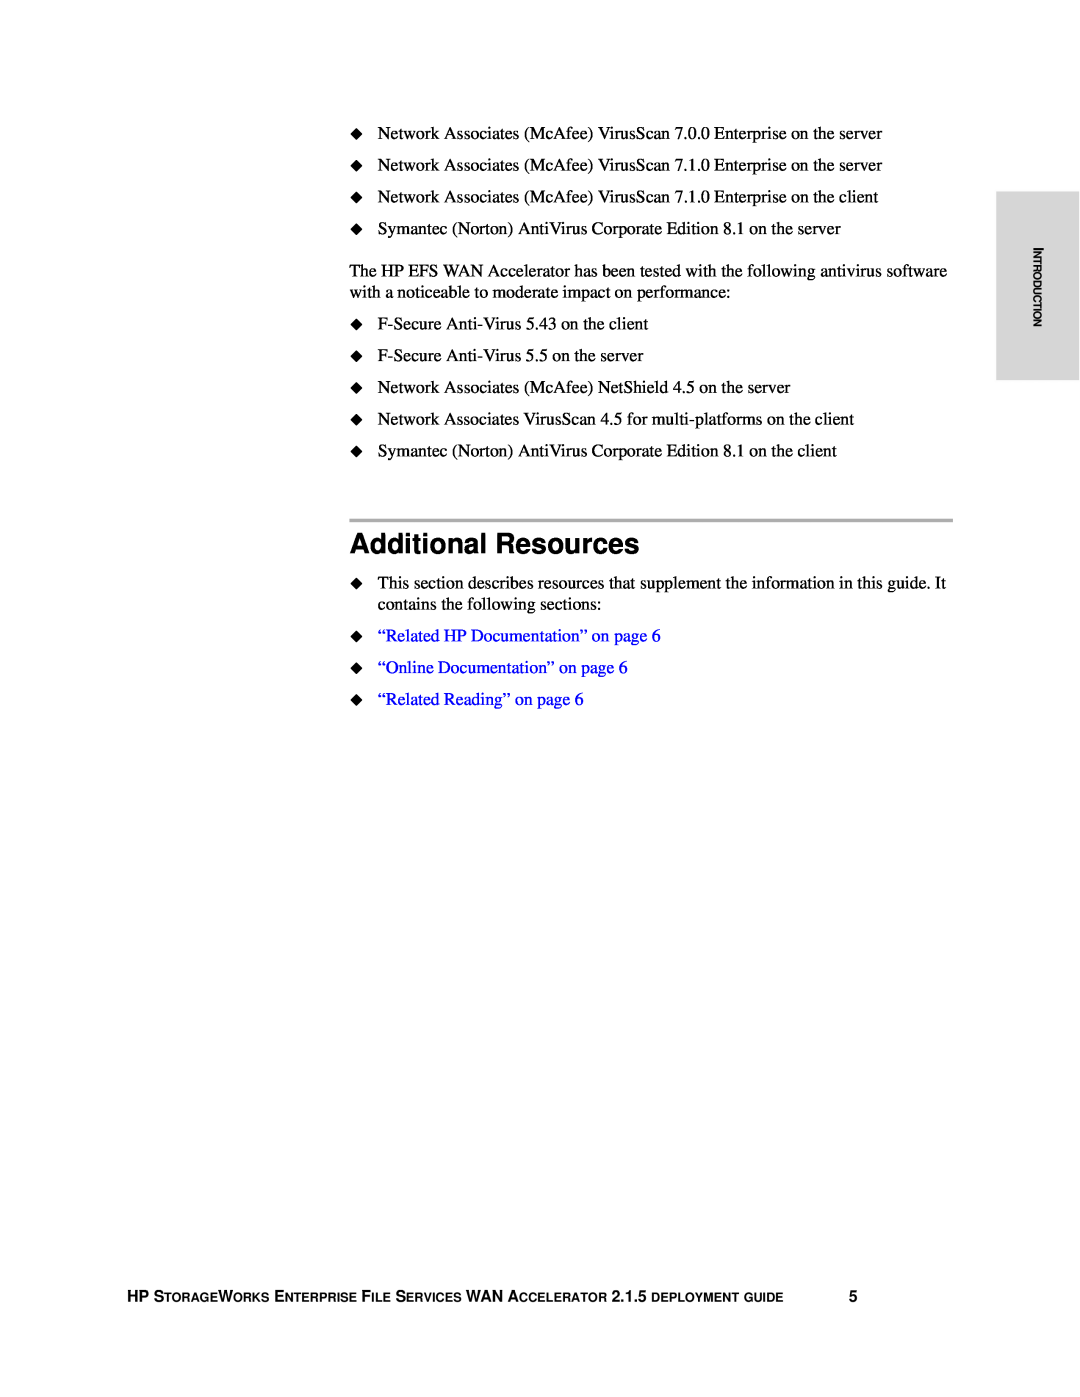 HP Enterprise File Services WAN Accelerator manual Additional Resources, ‹ “Related Reading” on page 